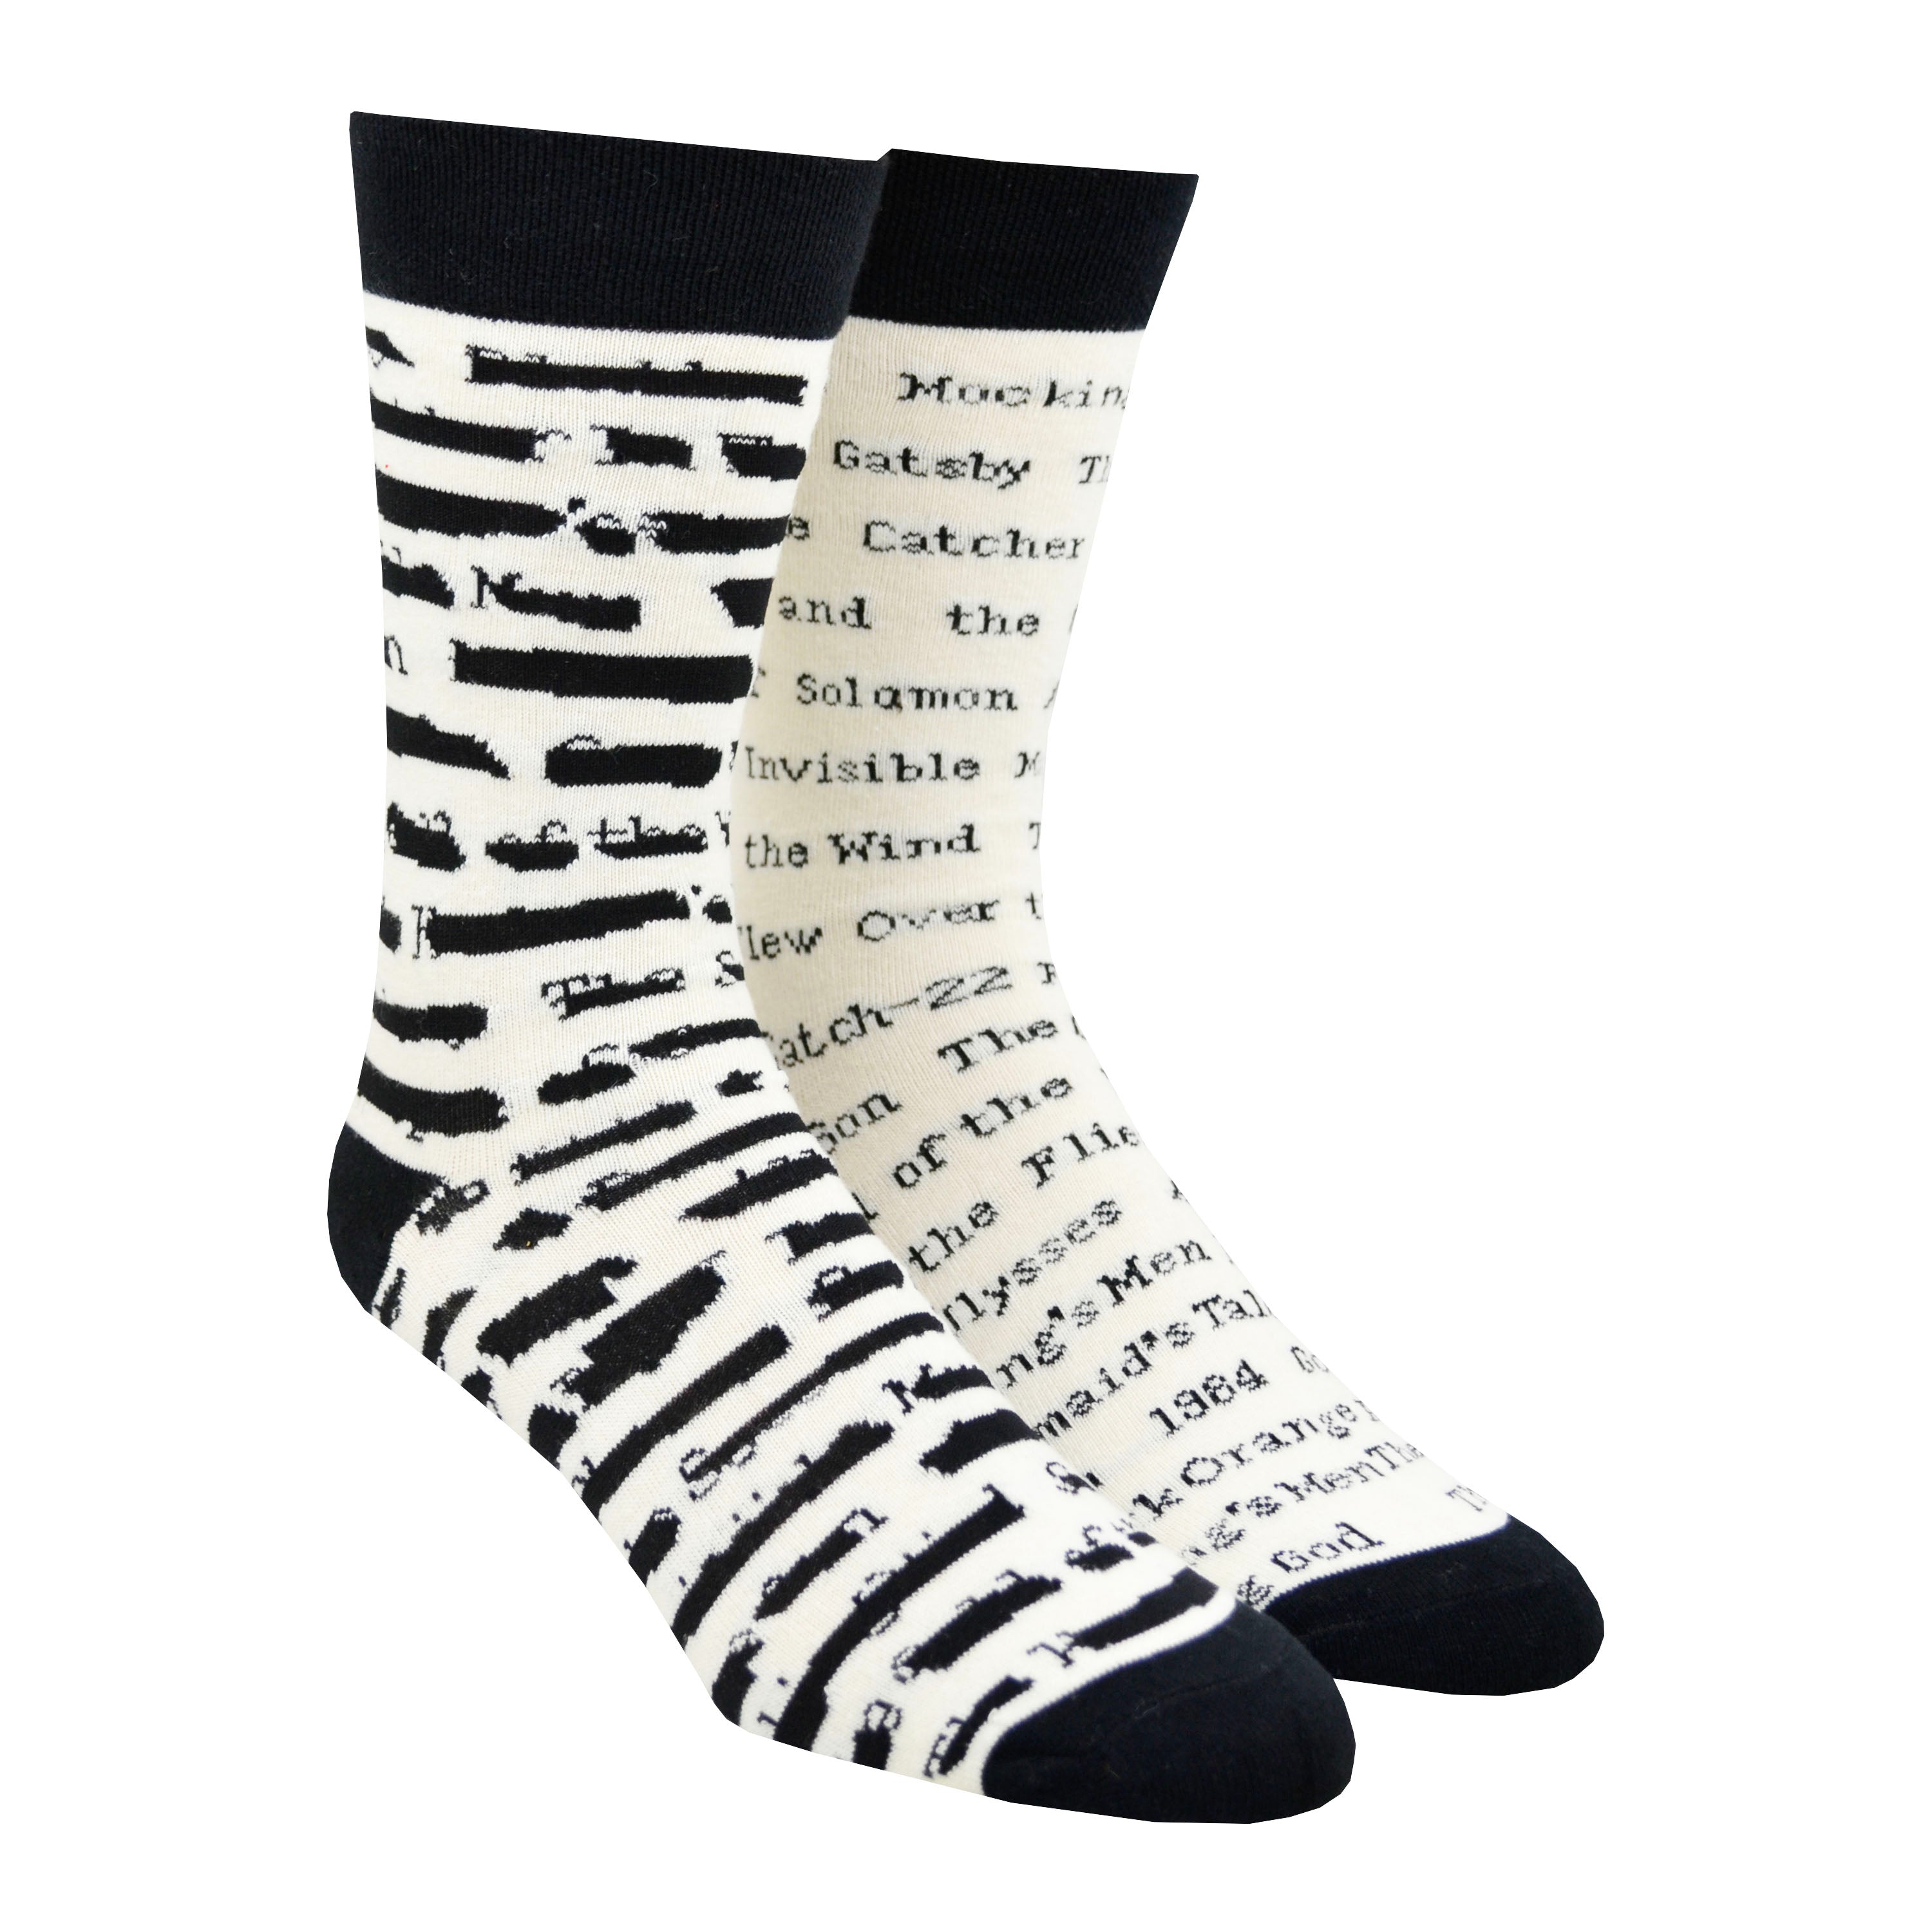 Shown on staggered leg forms, a pair of Out of Print brand unisex mismatched cotton crew socks in white with a black heel/cuff/toe. The right sock features typewriter font listings of titles of banned books. The left sock features the same titles but blacked out.